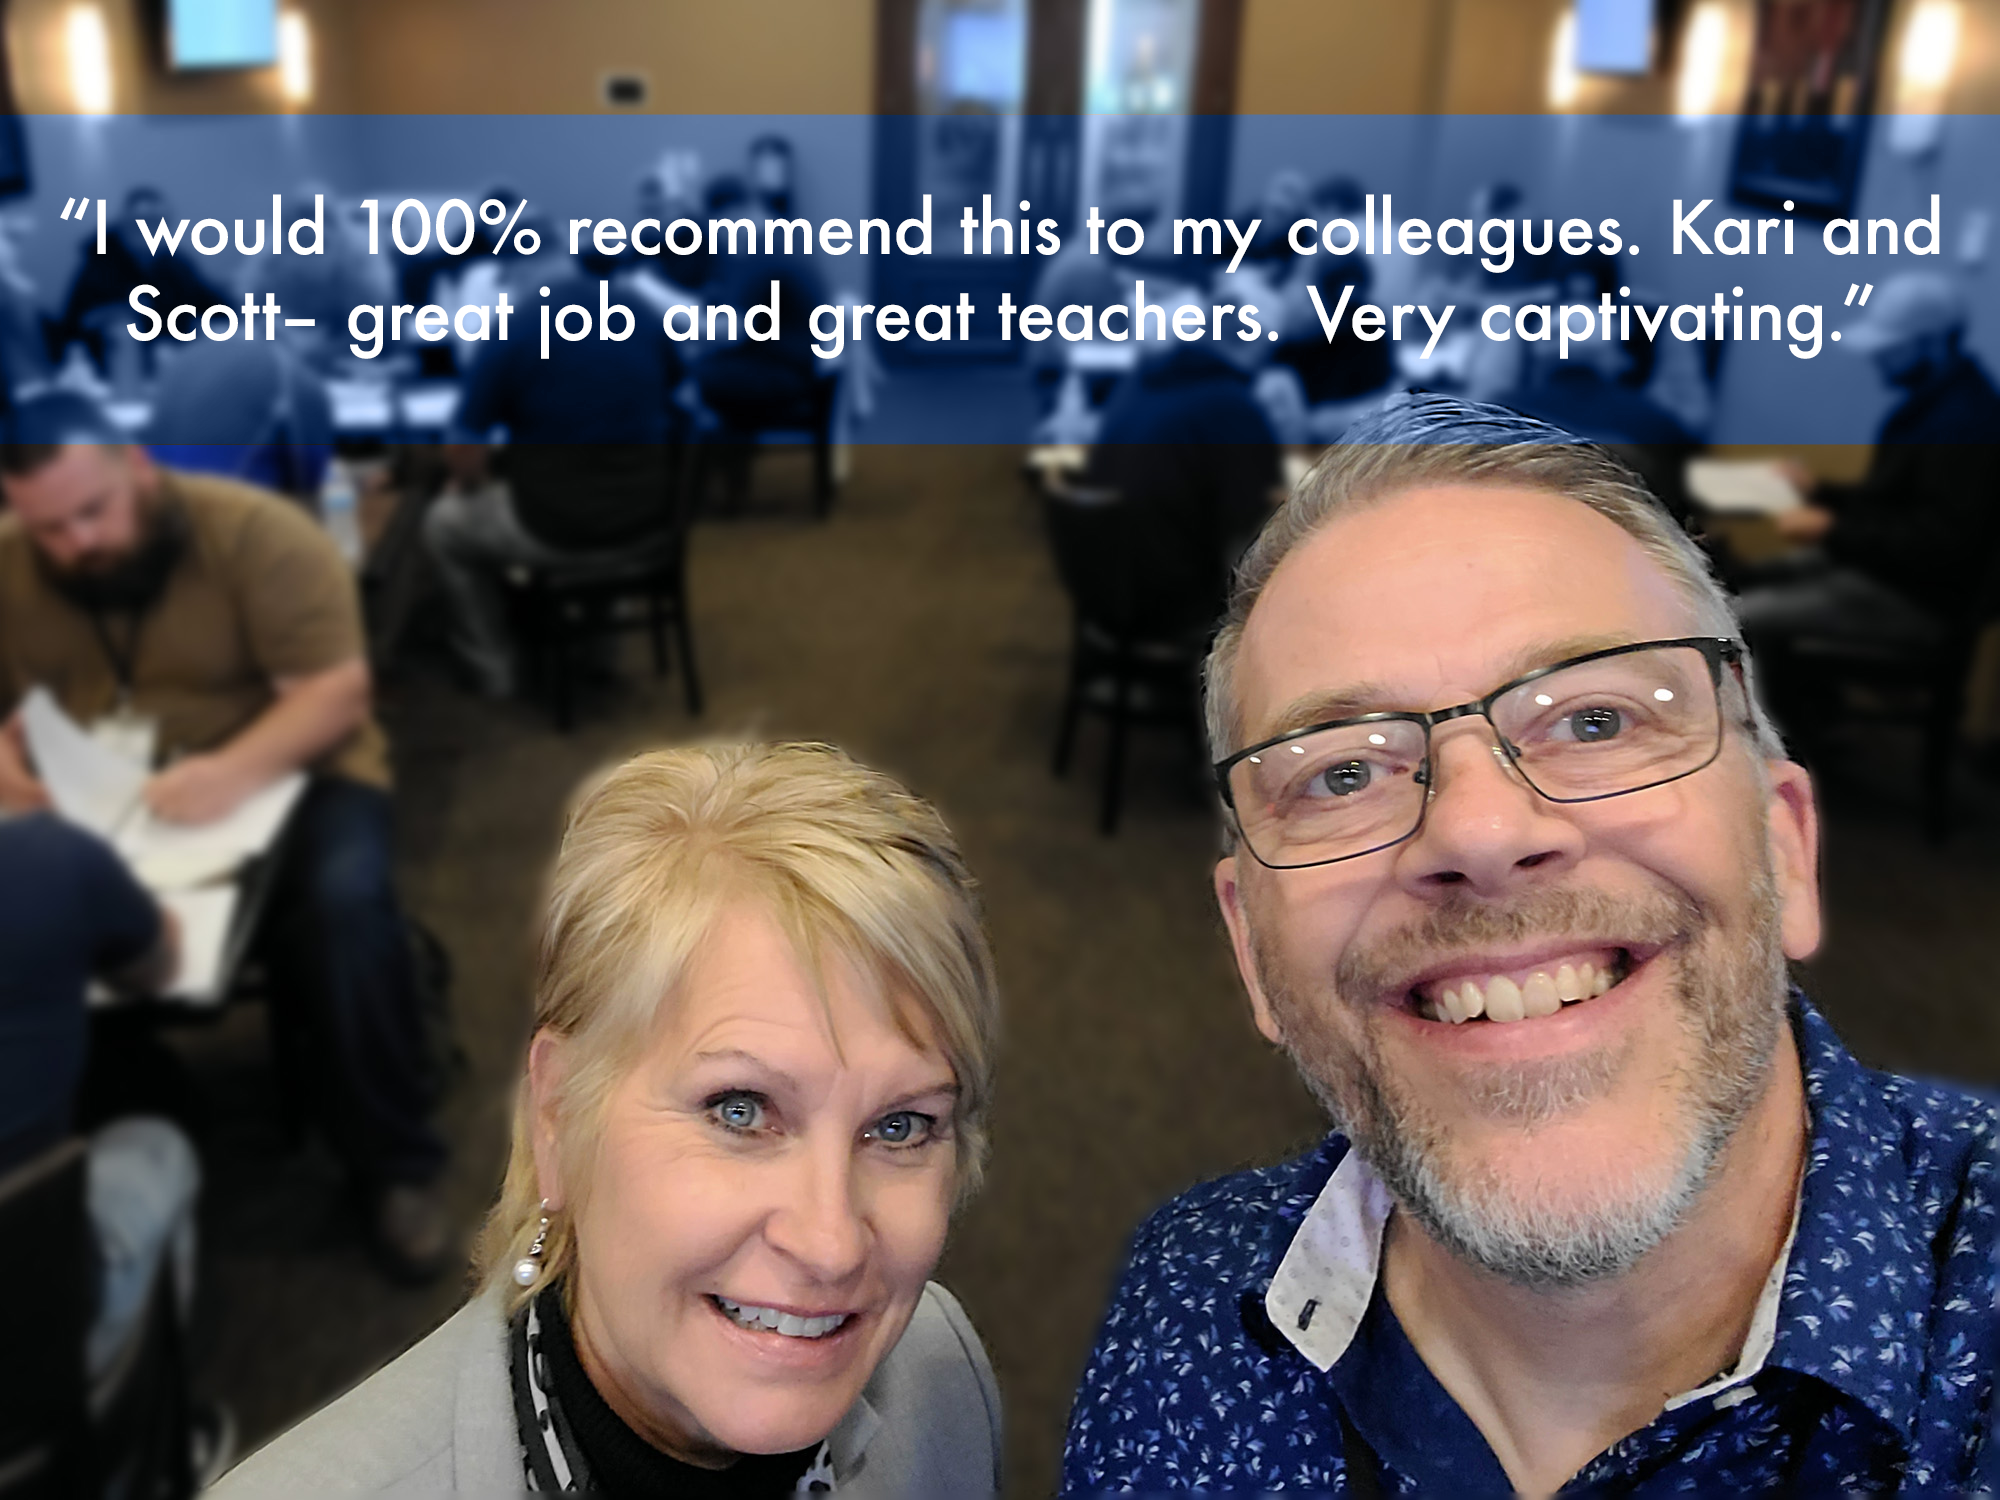 “I would 100% recommend this to my colleagues. Kari and Scott– great job and great teachers. Very captivating.”